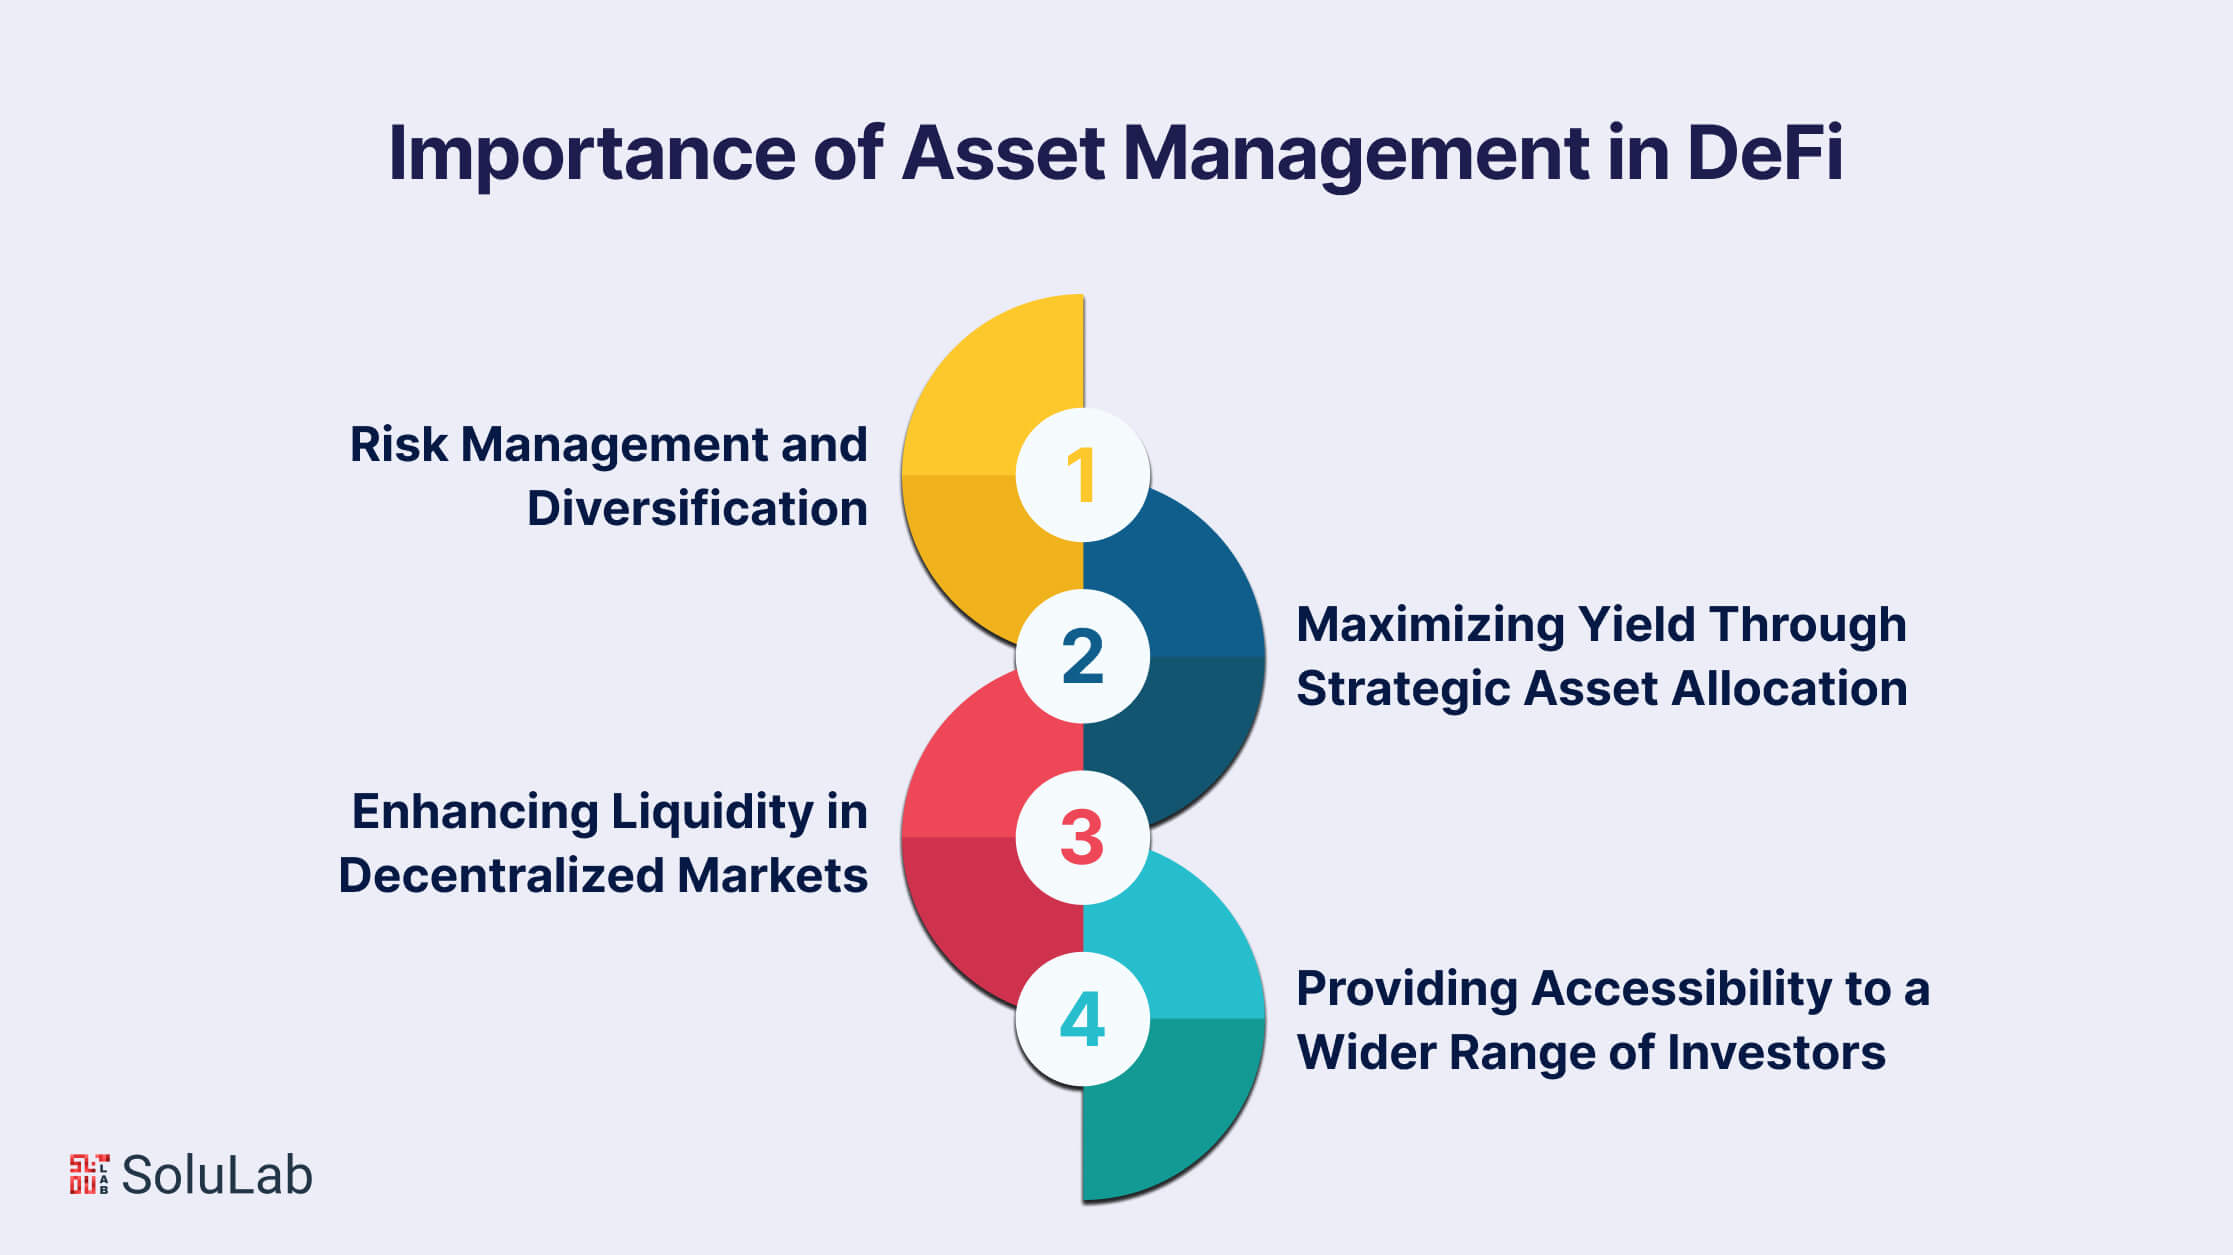 Importance of Asset Management in DeFi